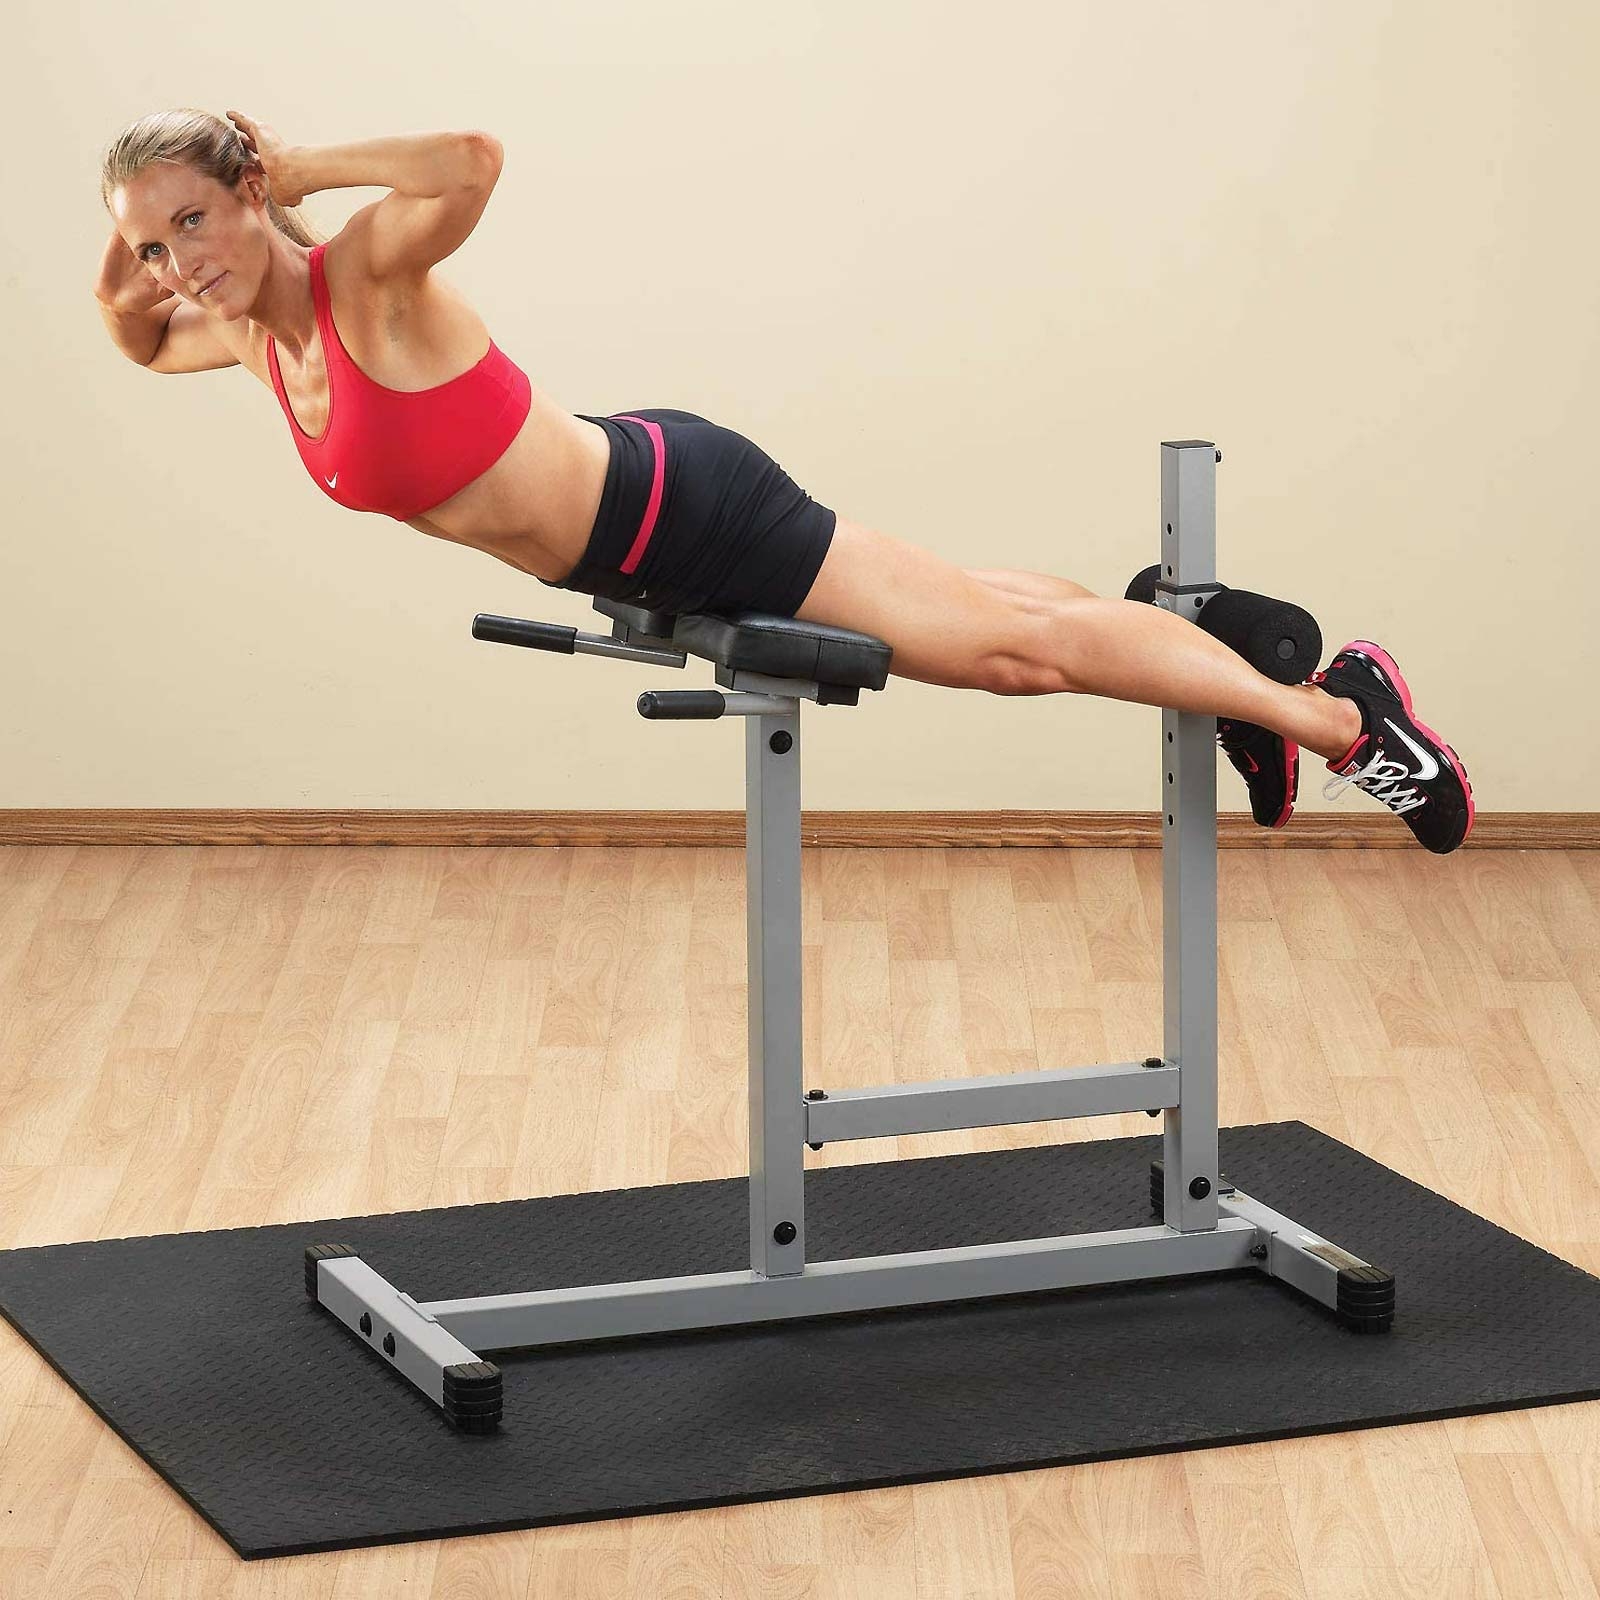 Programme musculation chaise romaine